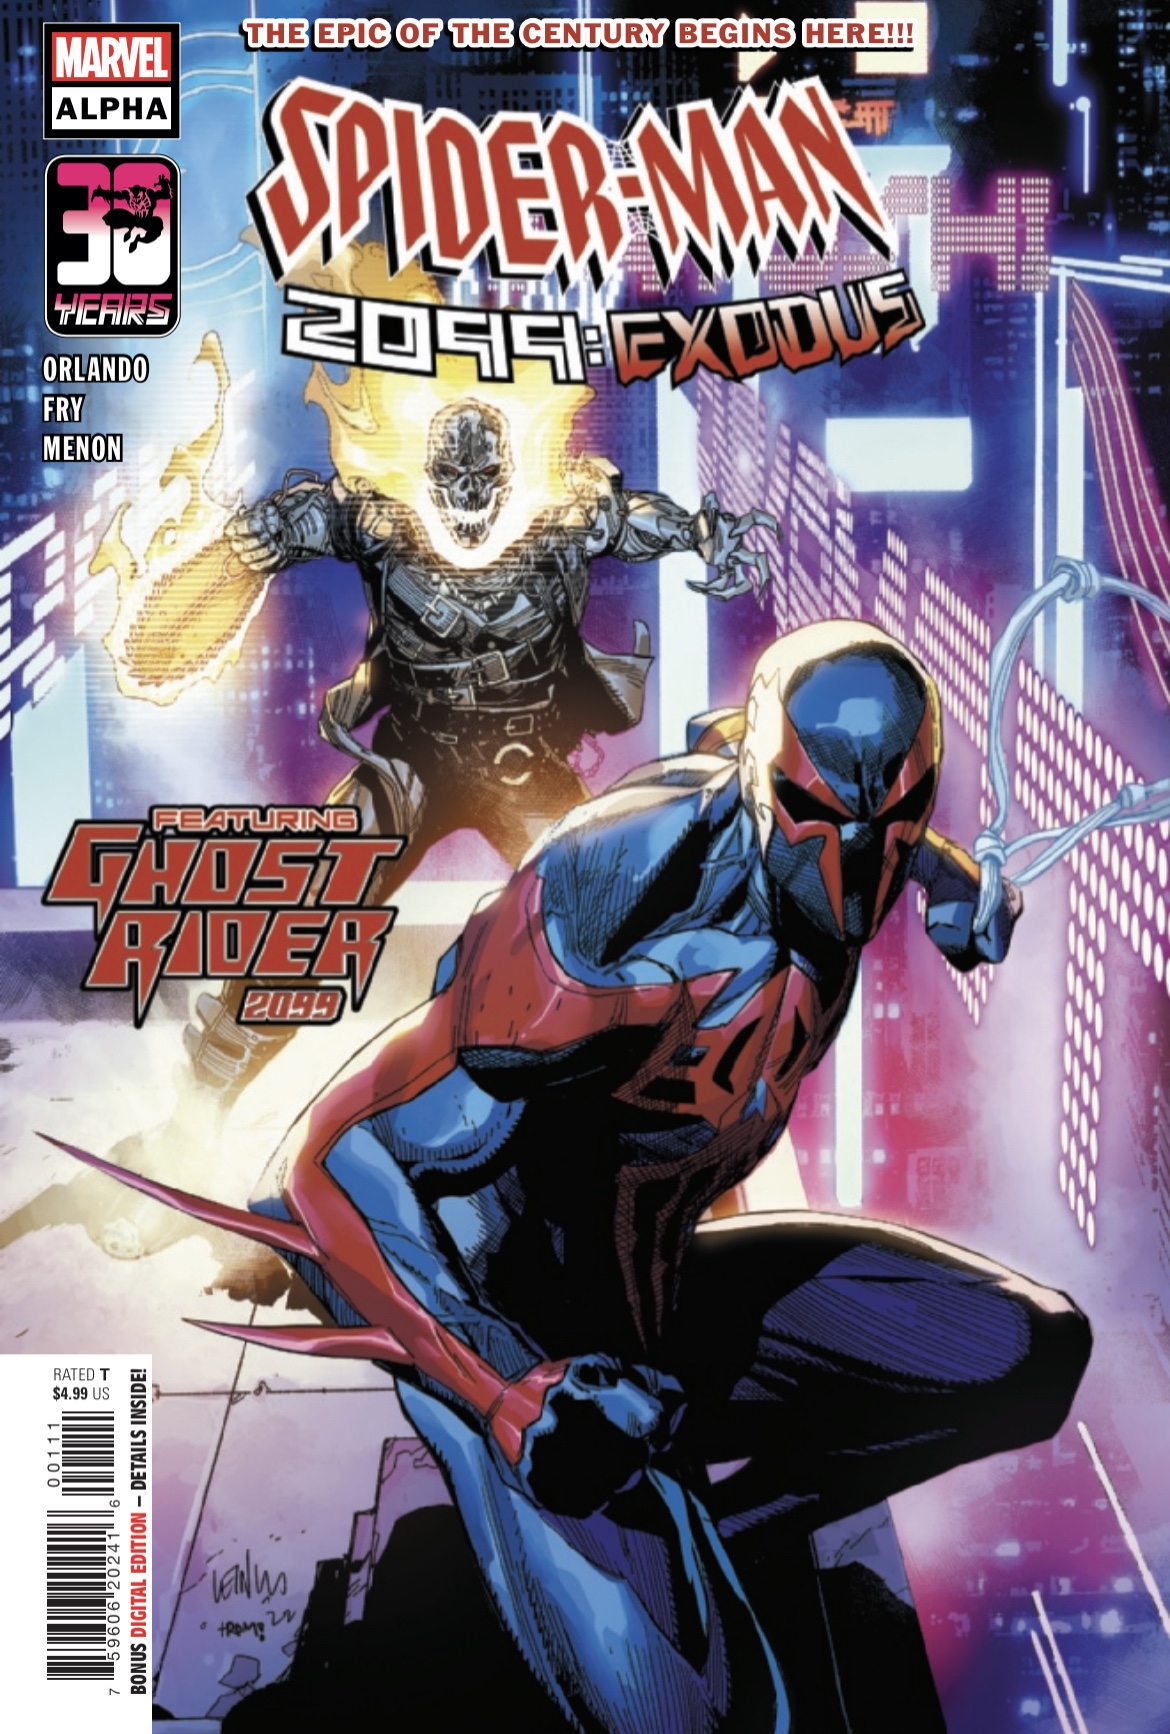 Spider-Man 2099: Exodus - Alpha #1 Preview - The Comic Book Dispatch